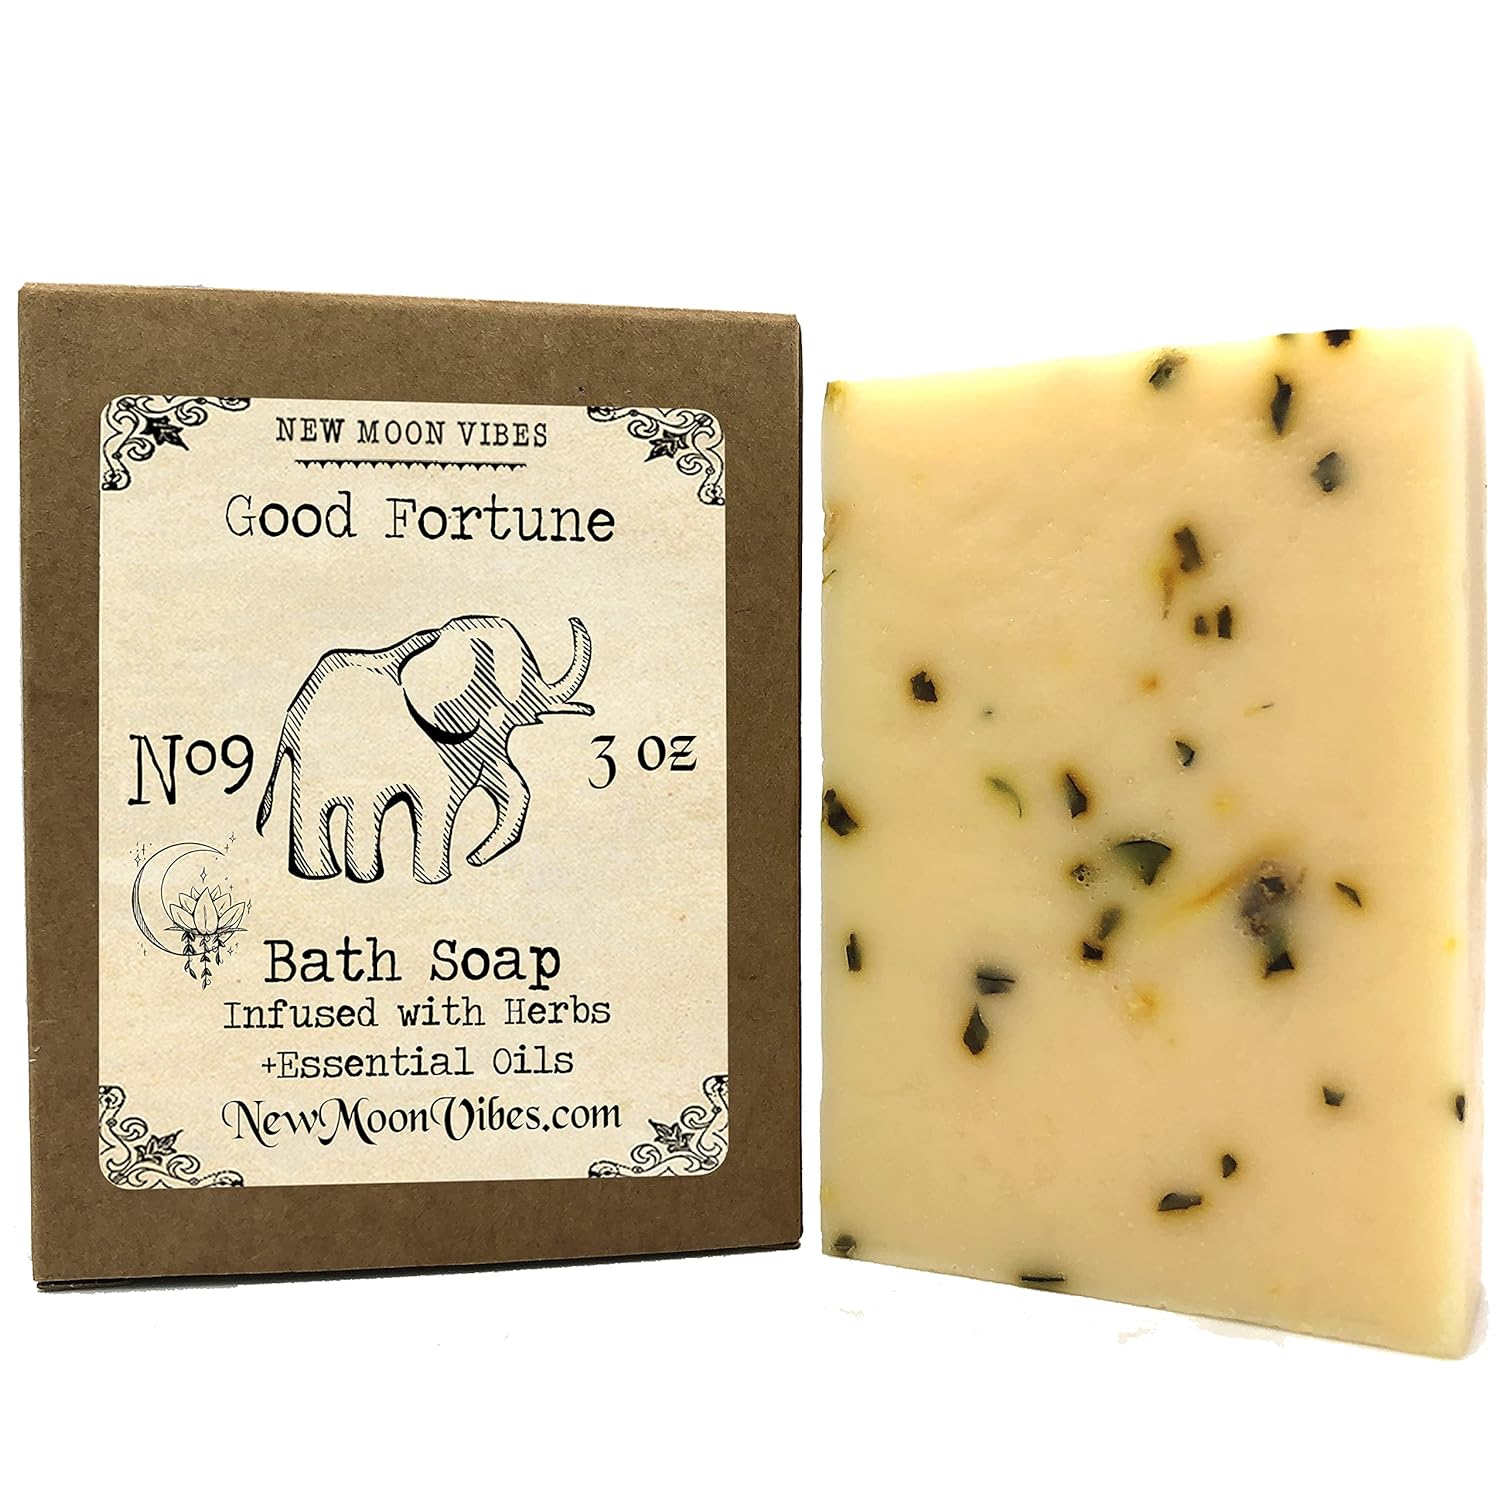 THE TUTU FAIRY Good Fortune Essential Oils Herbal Ritual Bath Soap Bar Infused with Real Herbs Botanicals Scented Enhance Intuition Luck Success Confidence Courage Manifest Goals Reverse Bad Luck